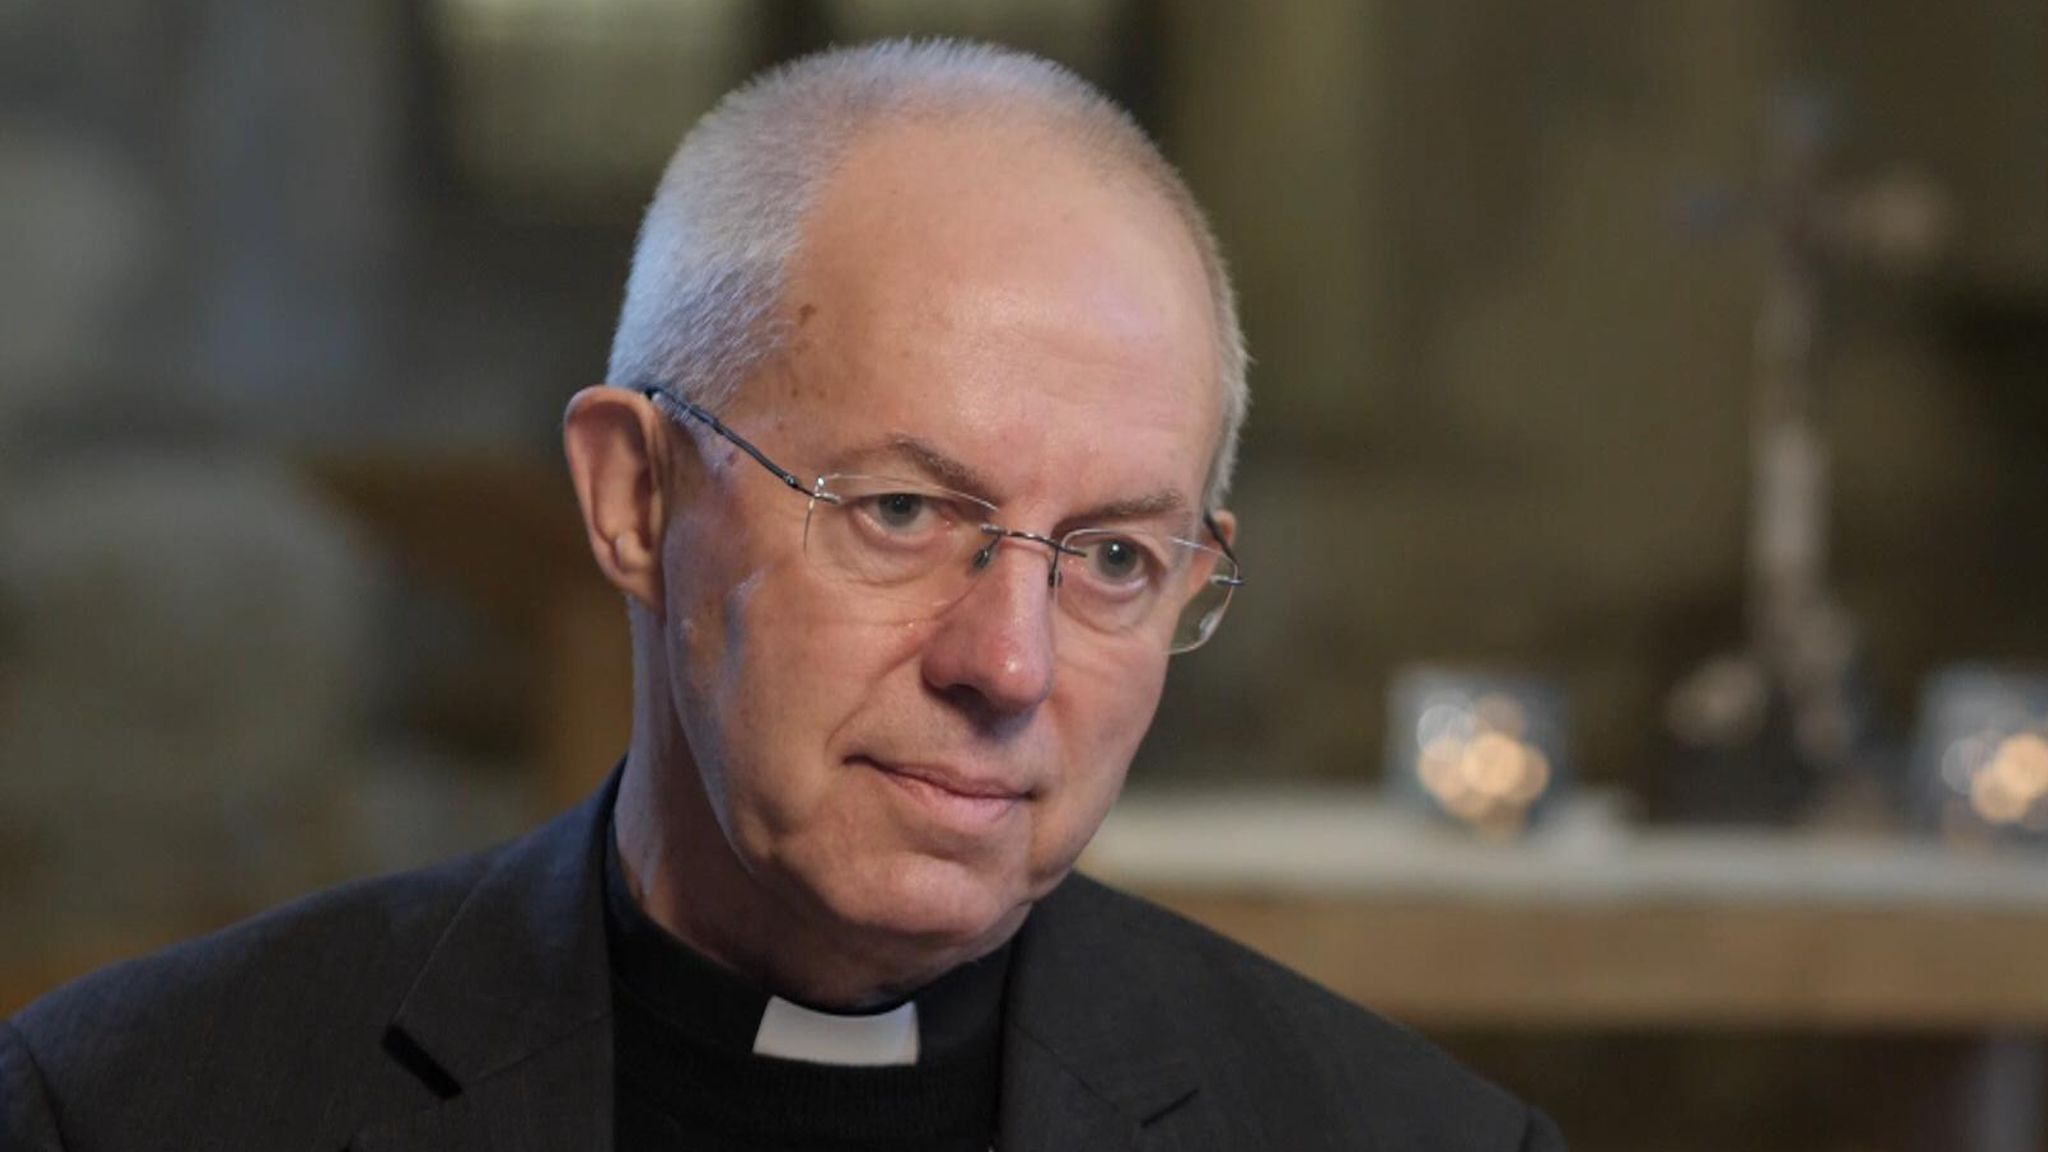 Justin Welby - leader of the Anglican Church